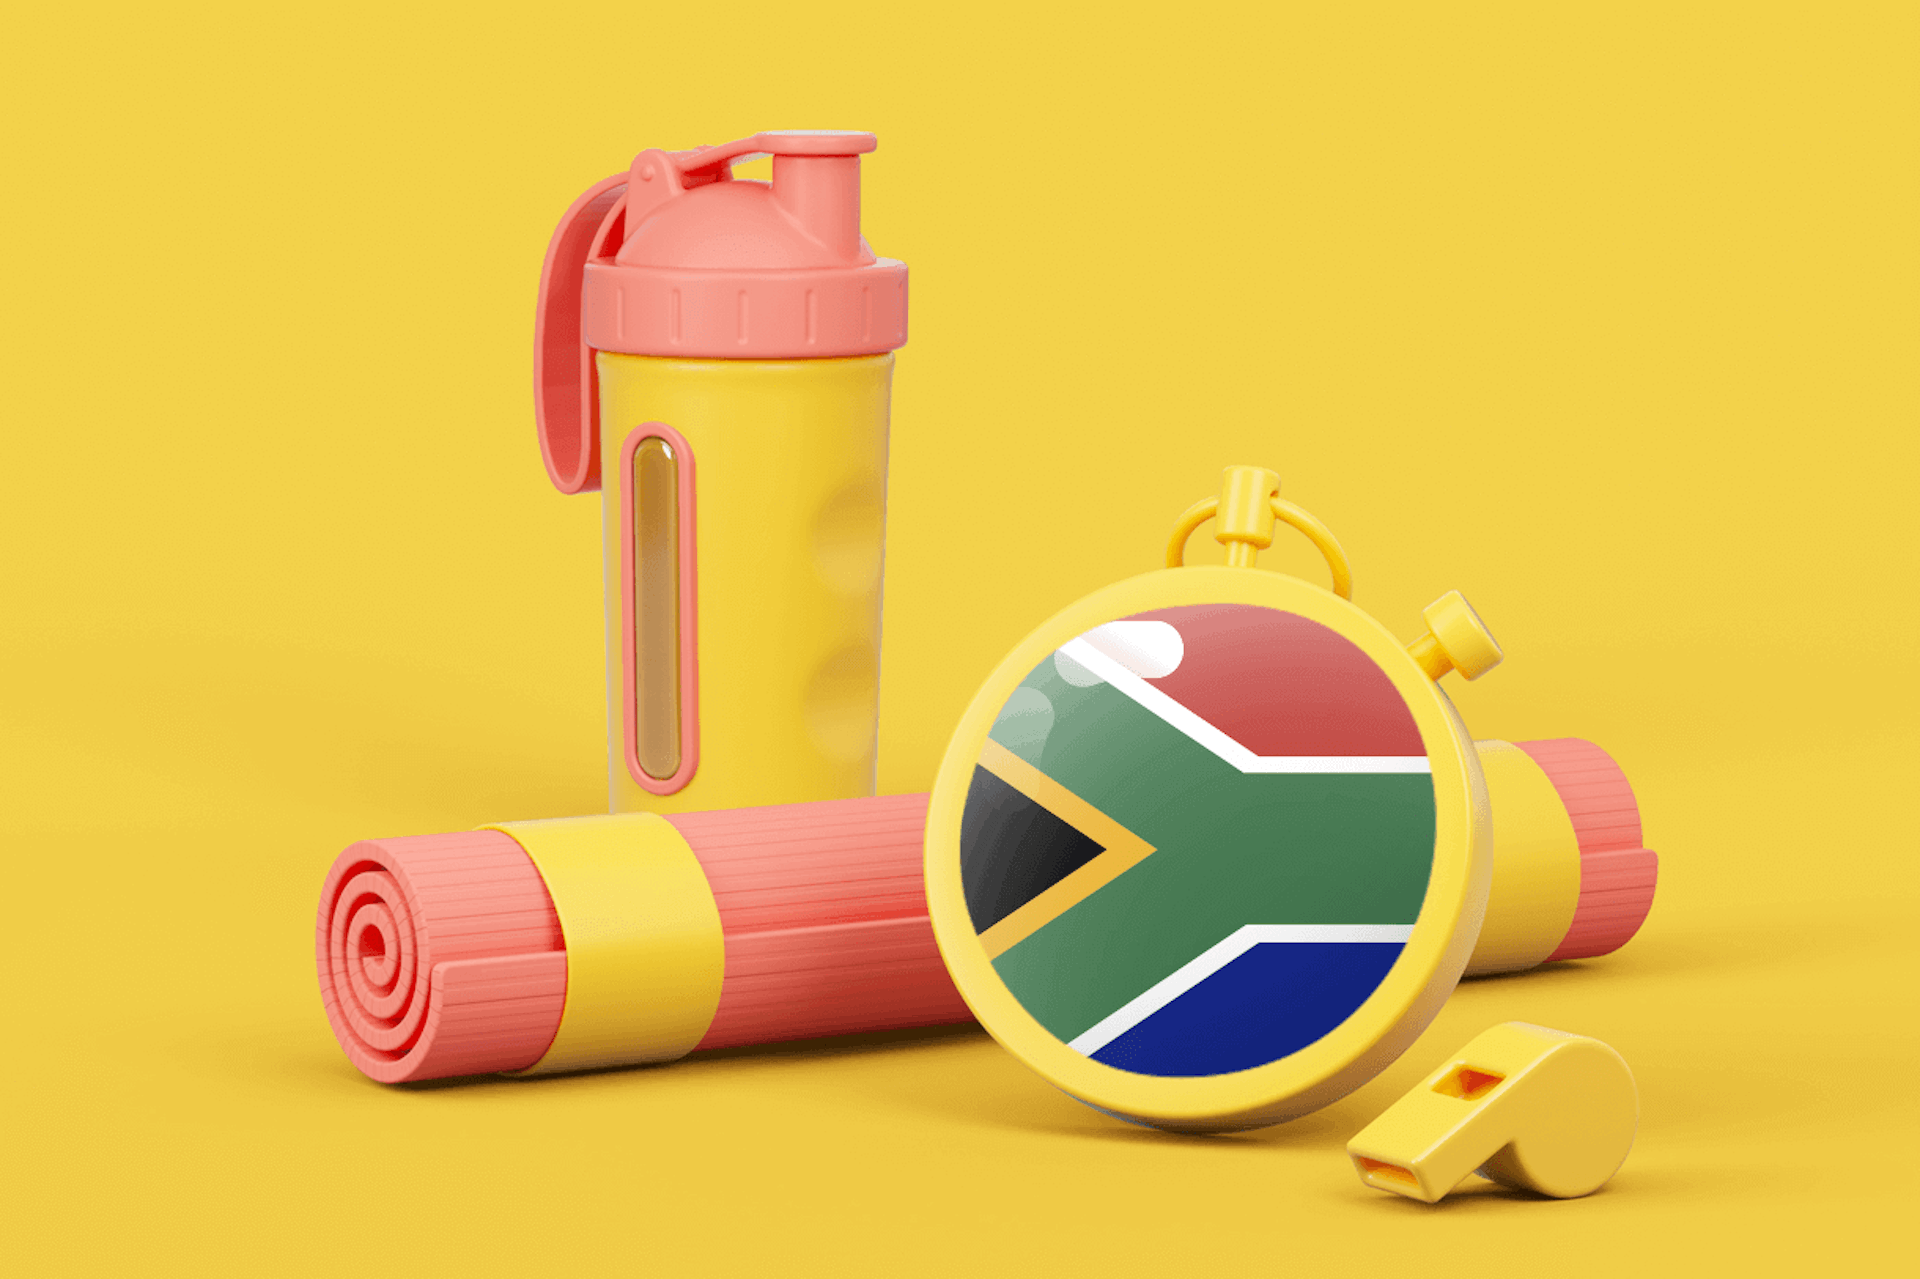 3d Illustration of fitness equipment and the South African flag to display the list of top South African fitness influencers